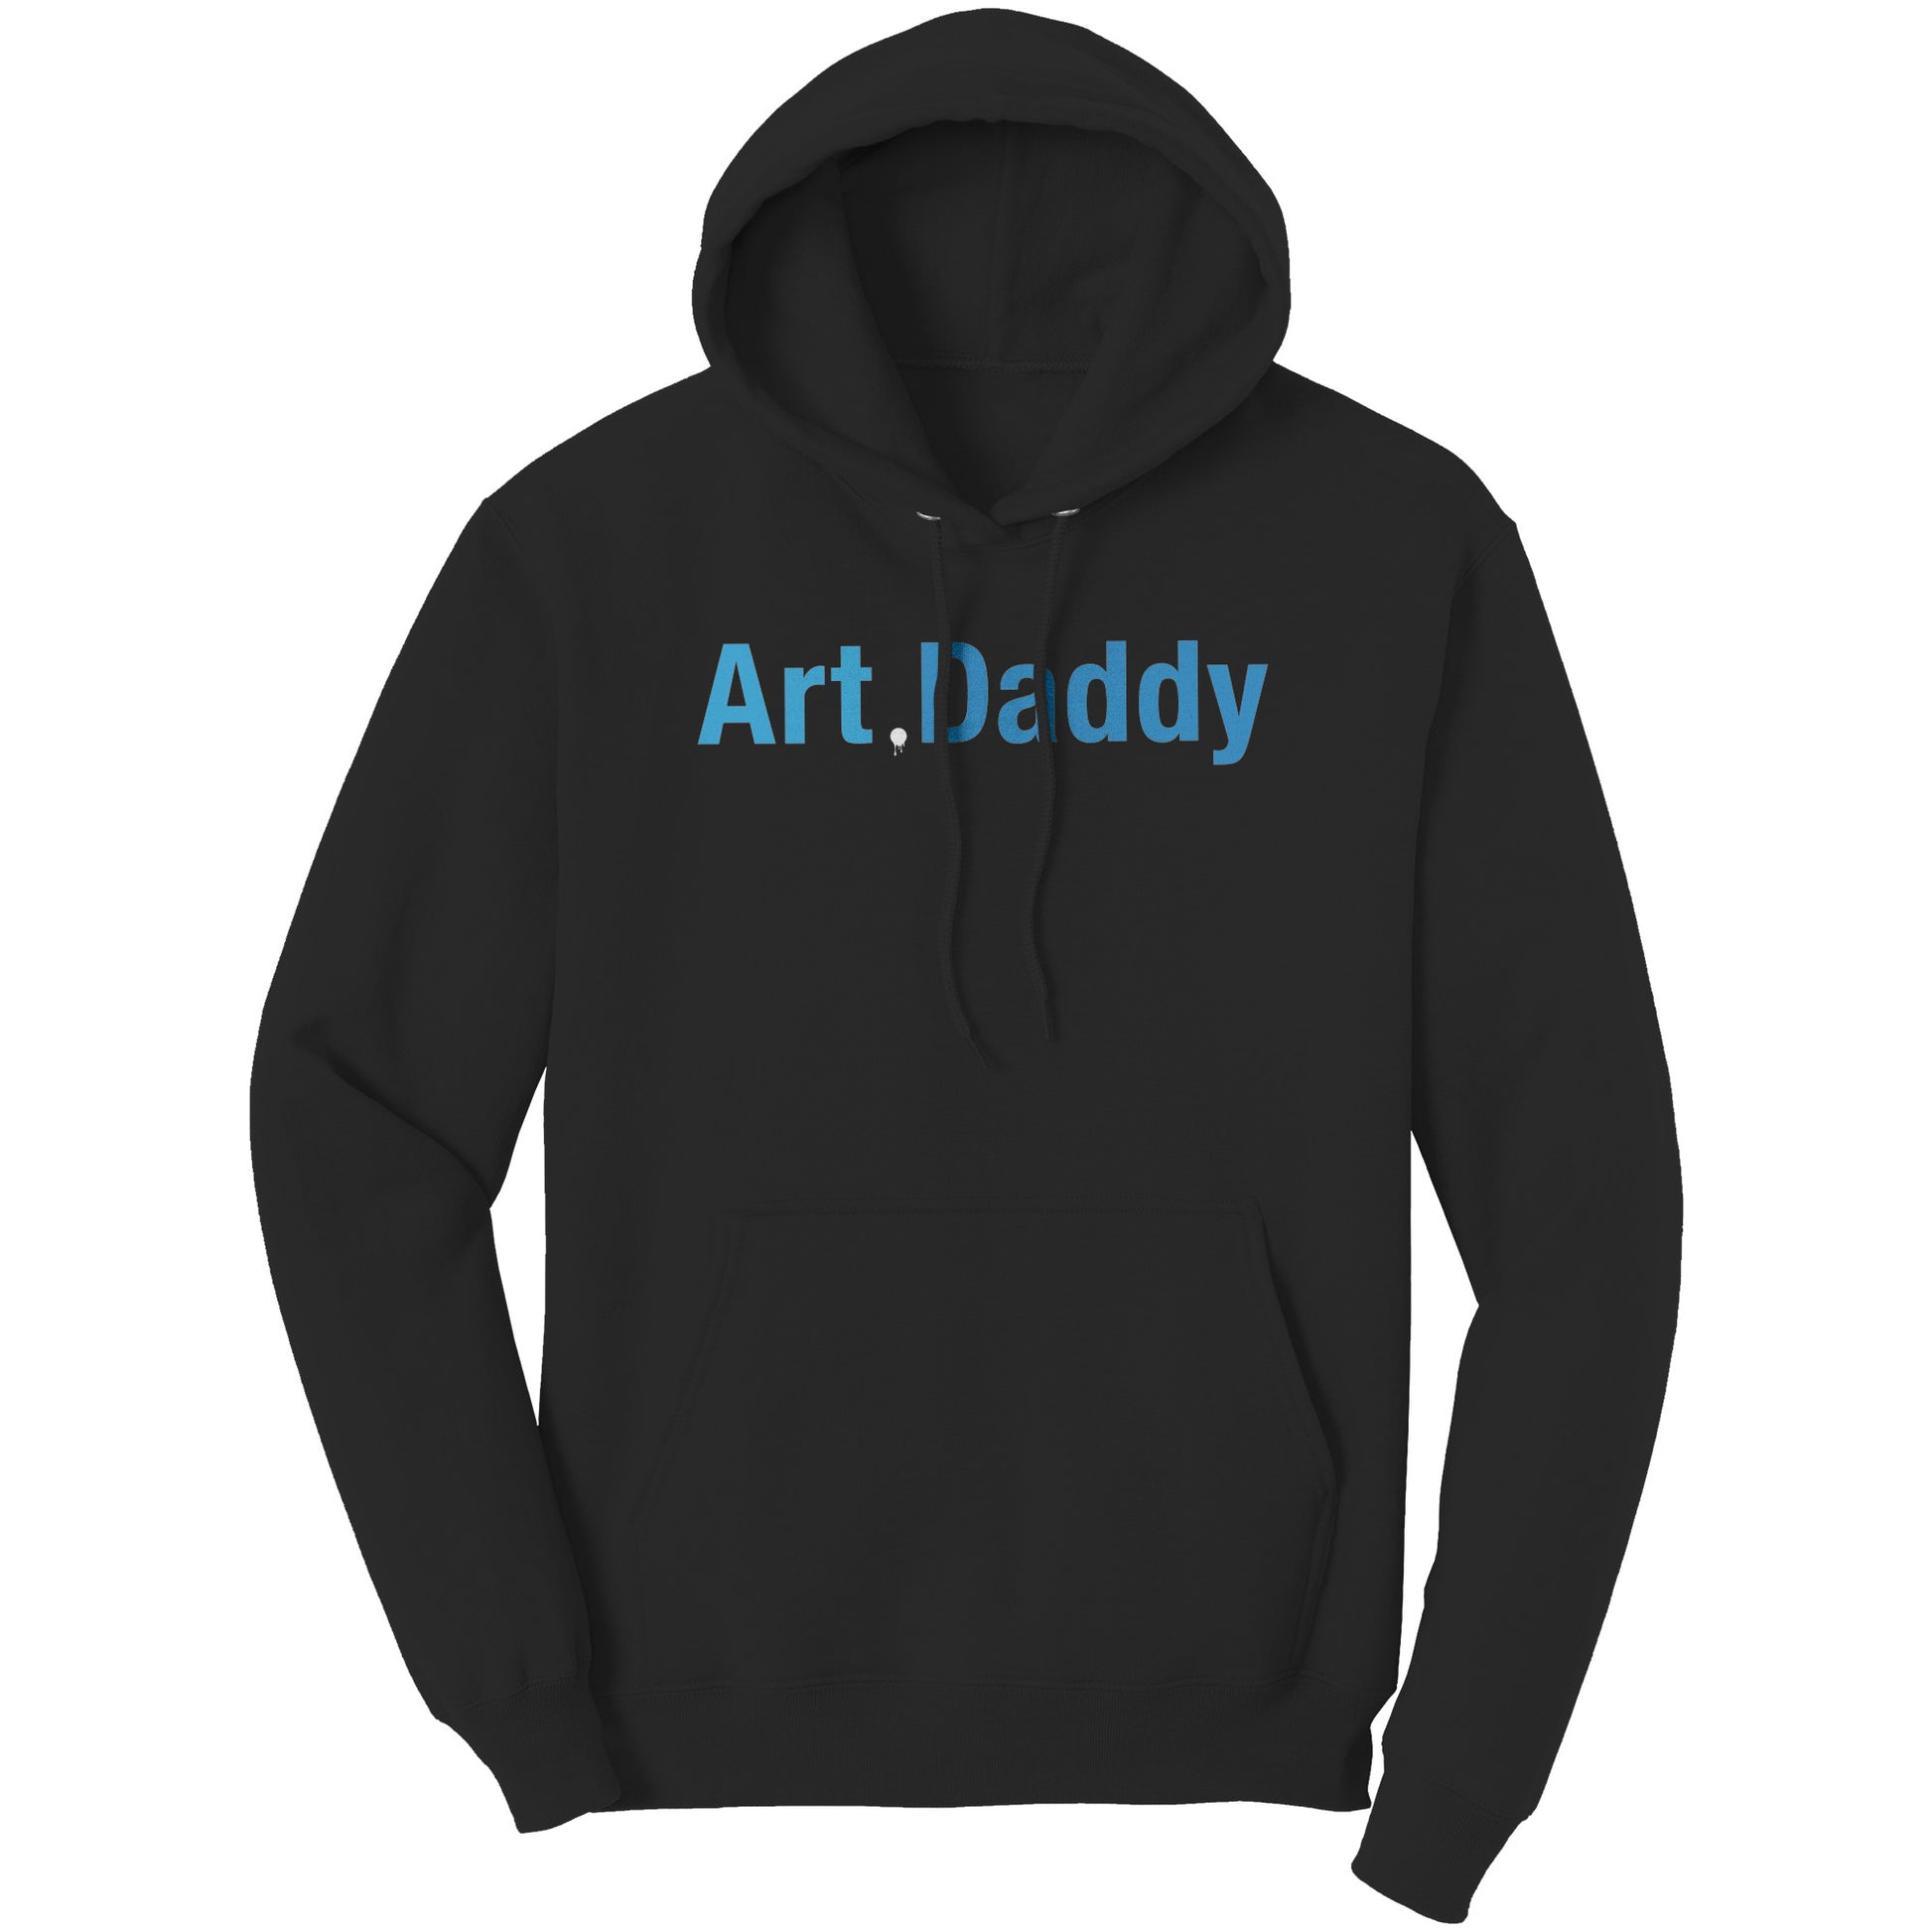 Art Daddy hoodie and don't forget to subscribe to art.daddy on OF